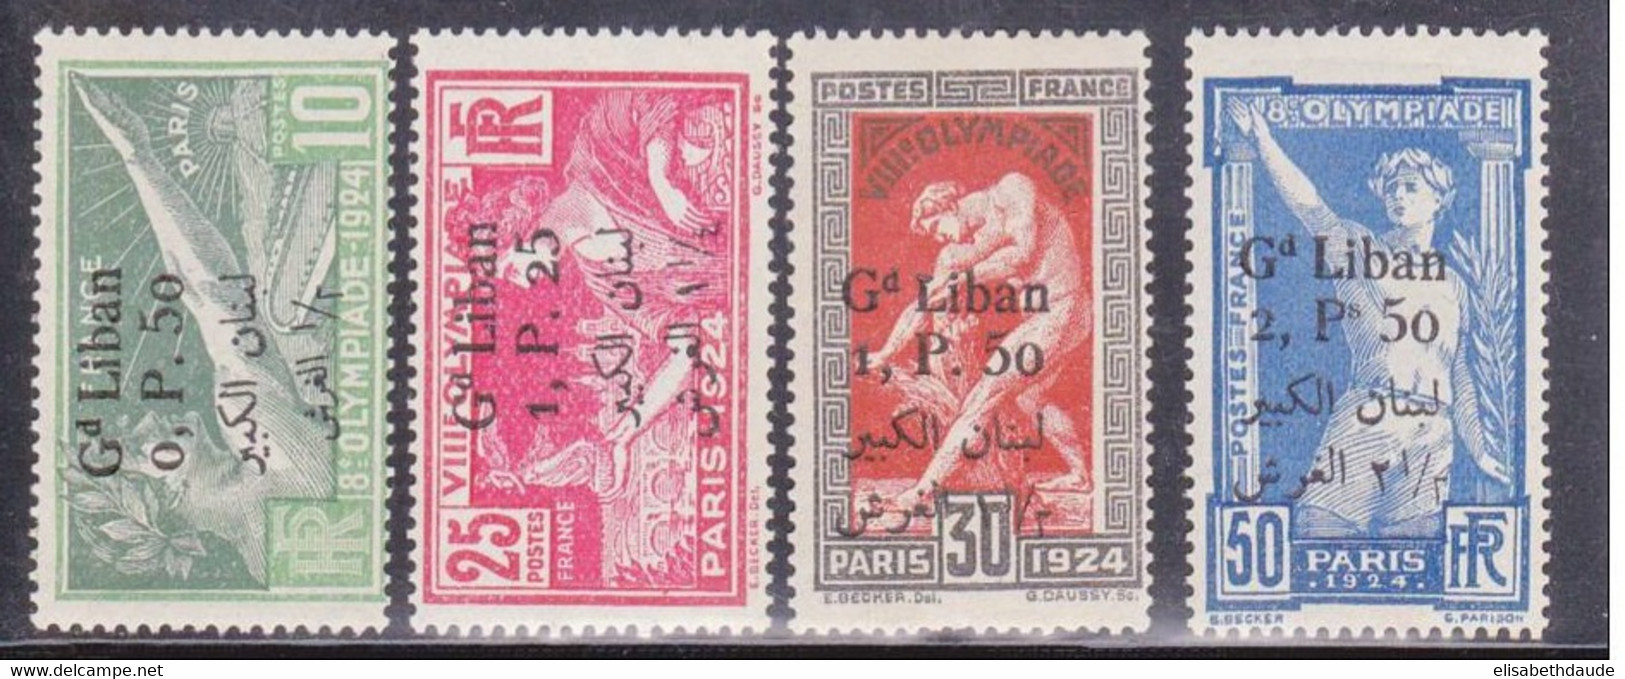 GRAND LIBAN - 1924 - YVERT N° 45/48 * - COTE = 180 EUROS  - JEUX OLYMPIQUES - Unused Stamps